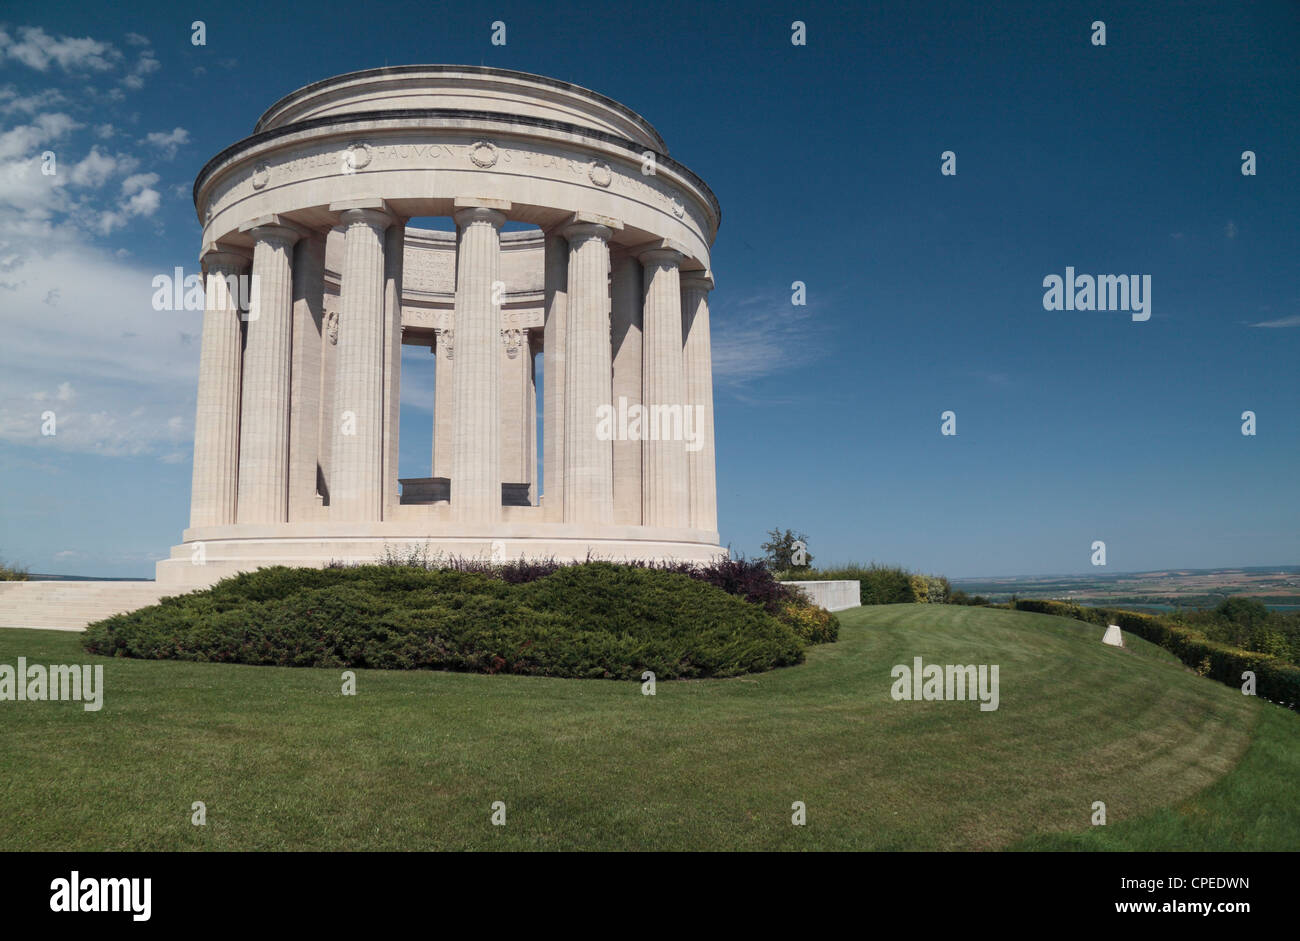 The Montsec American Monument Montsec (Thiaucourt), France, 10 miles east of the town of St. Mihiel. Stock Photo